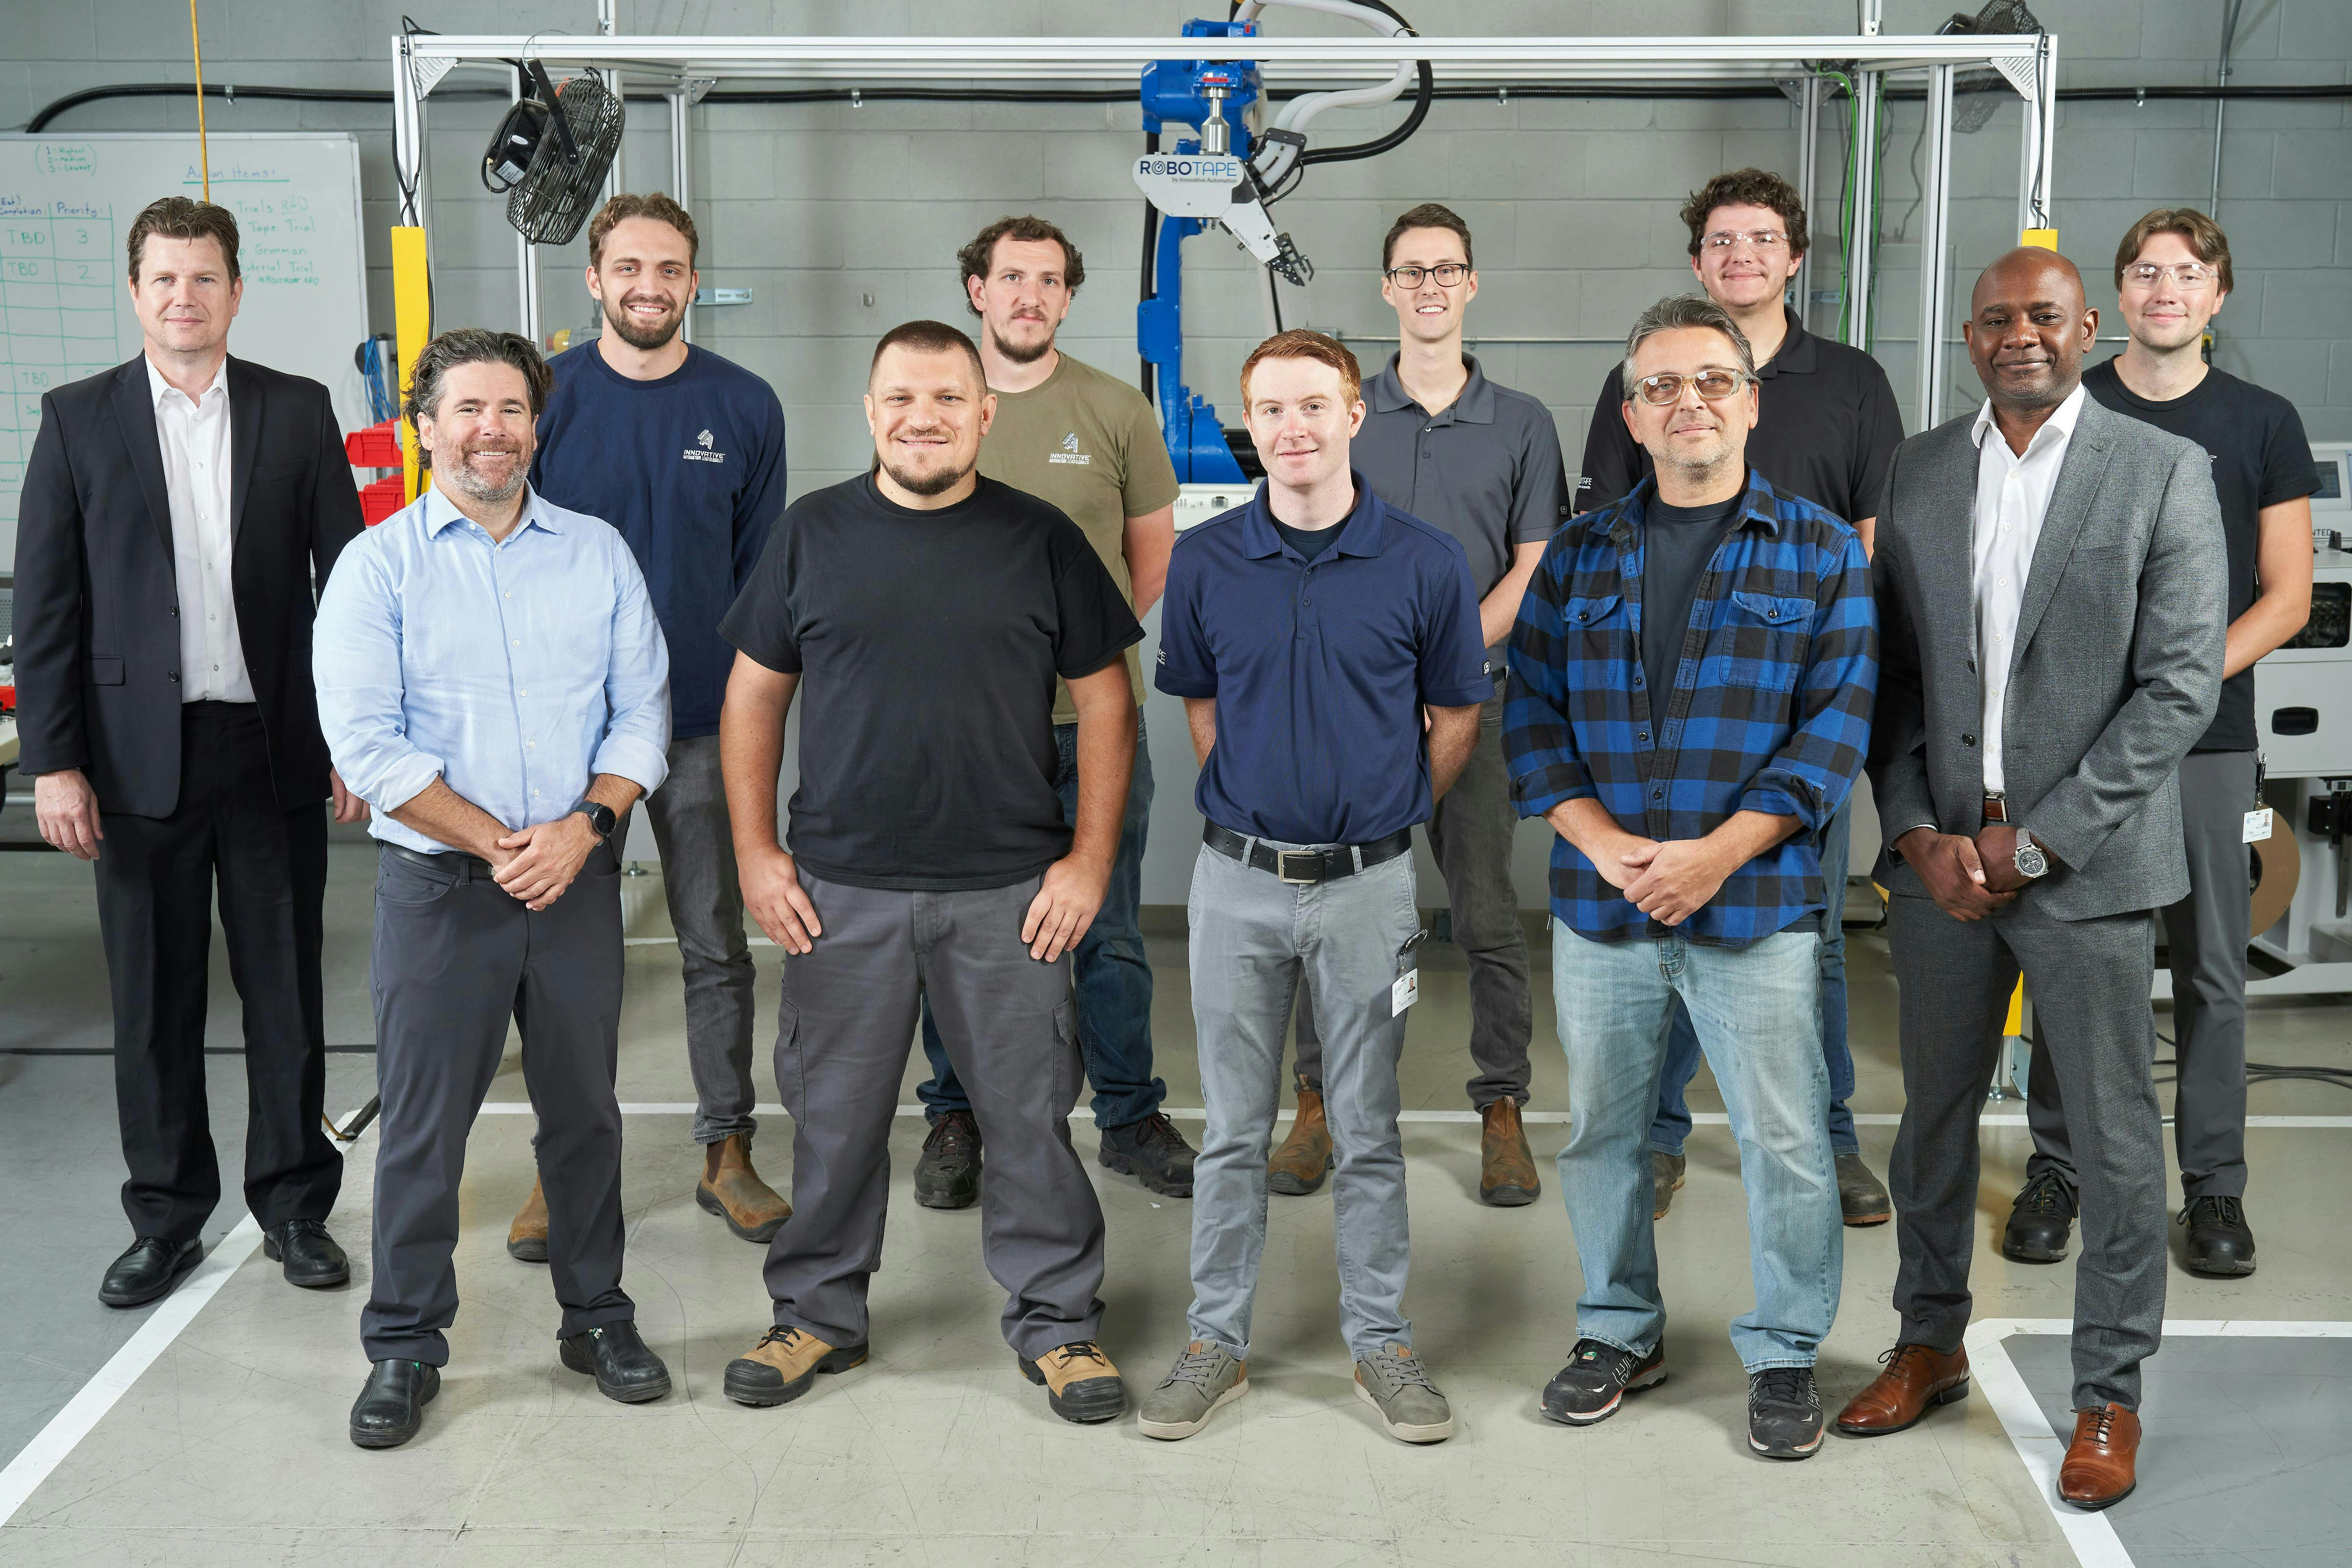 Figure 9: Jim Fallowfield, Beckhoff (back row, from left) with the Innovative Automation team of Josh Vander Doelen, Sean Wilson, Sean Robillard, Quinton Potts, Carter Metcalf, Michael Lalonde (front row, from left), Mike Likernyy, Zac Cutt, John Marinuzzo and Paul Pierre, Beckhoff, stick together at the RoboTape facility in Newmarket, Canada.